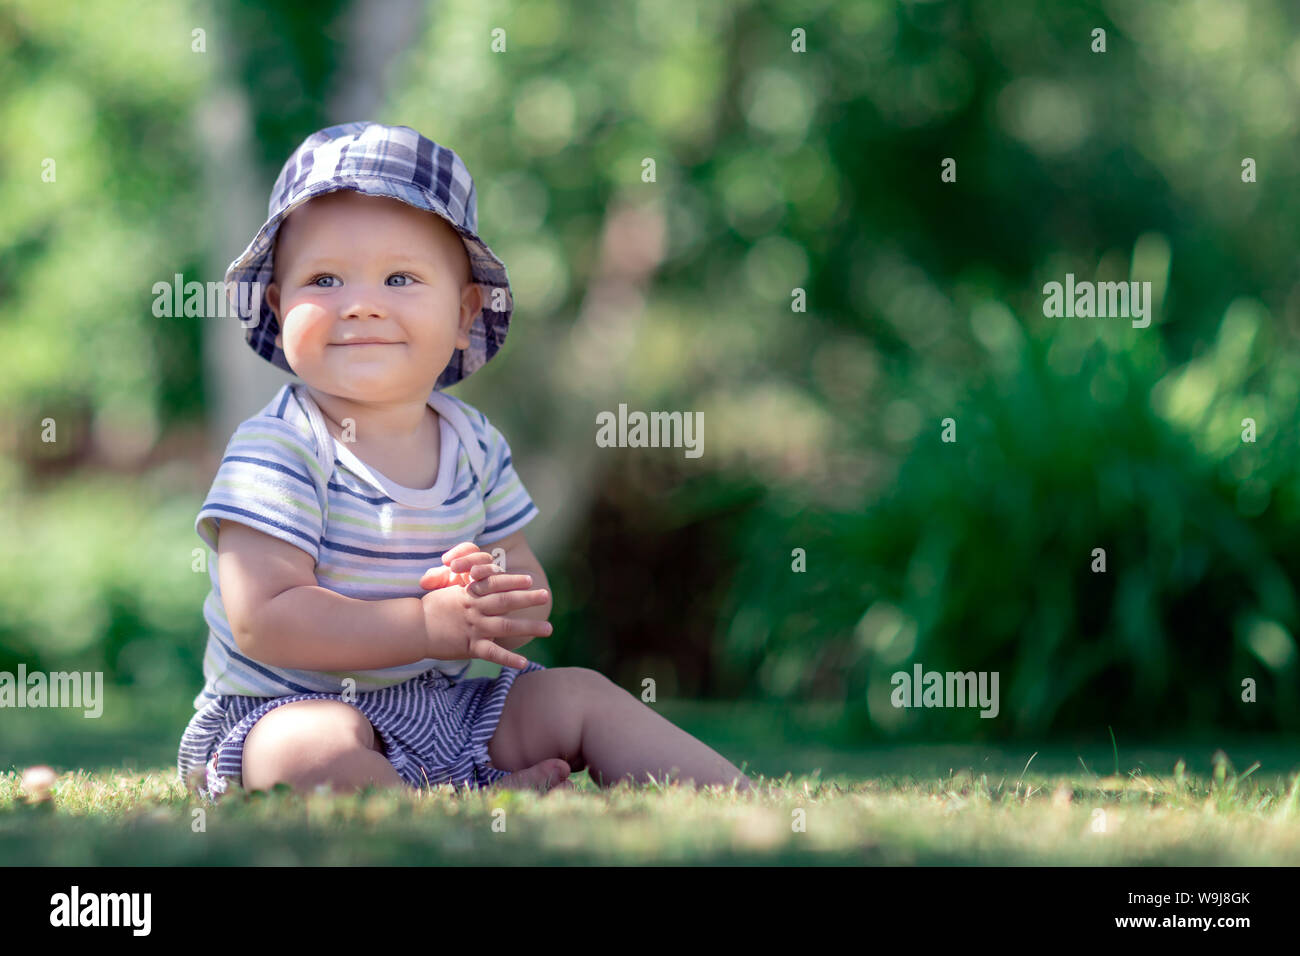 Cute baby sitting on the grass in the garden and applaud Stock Photo